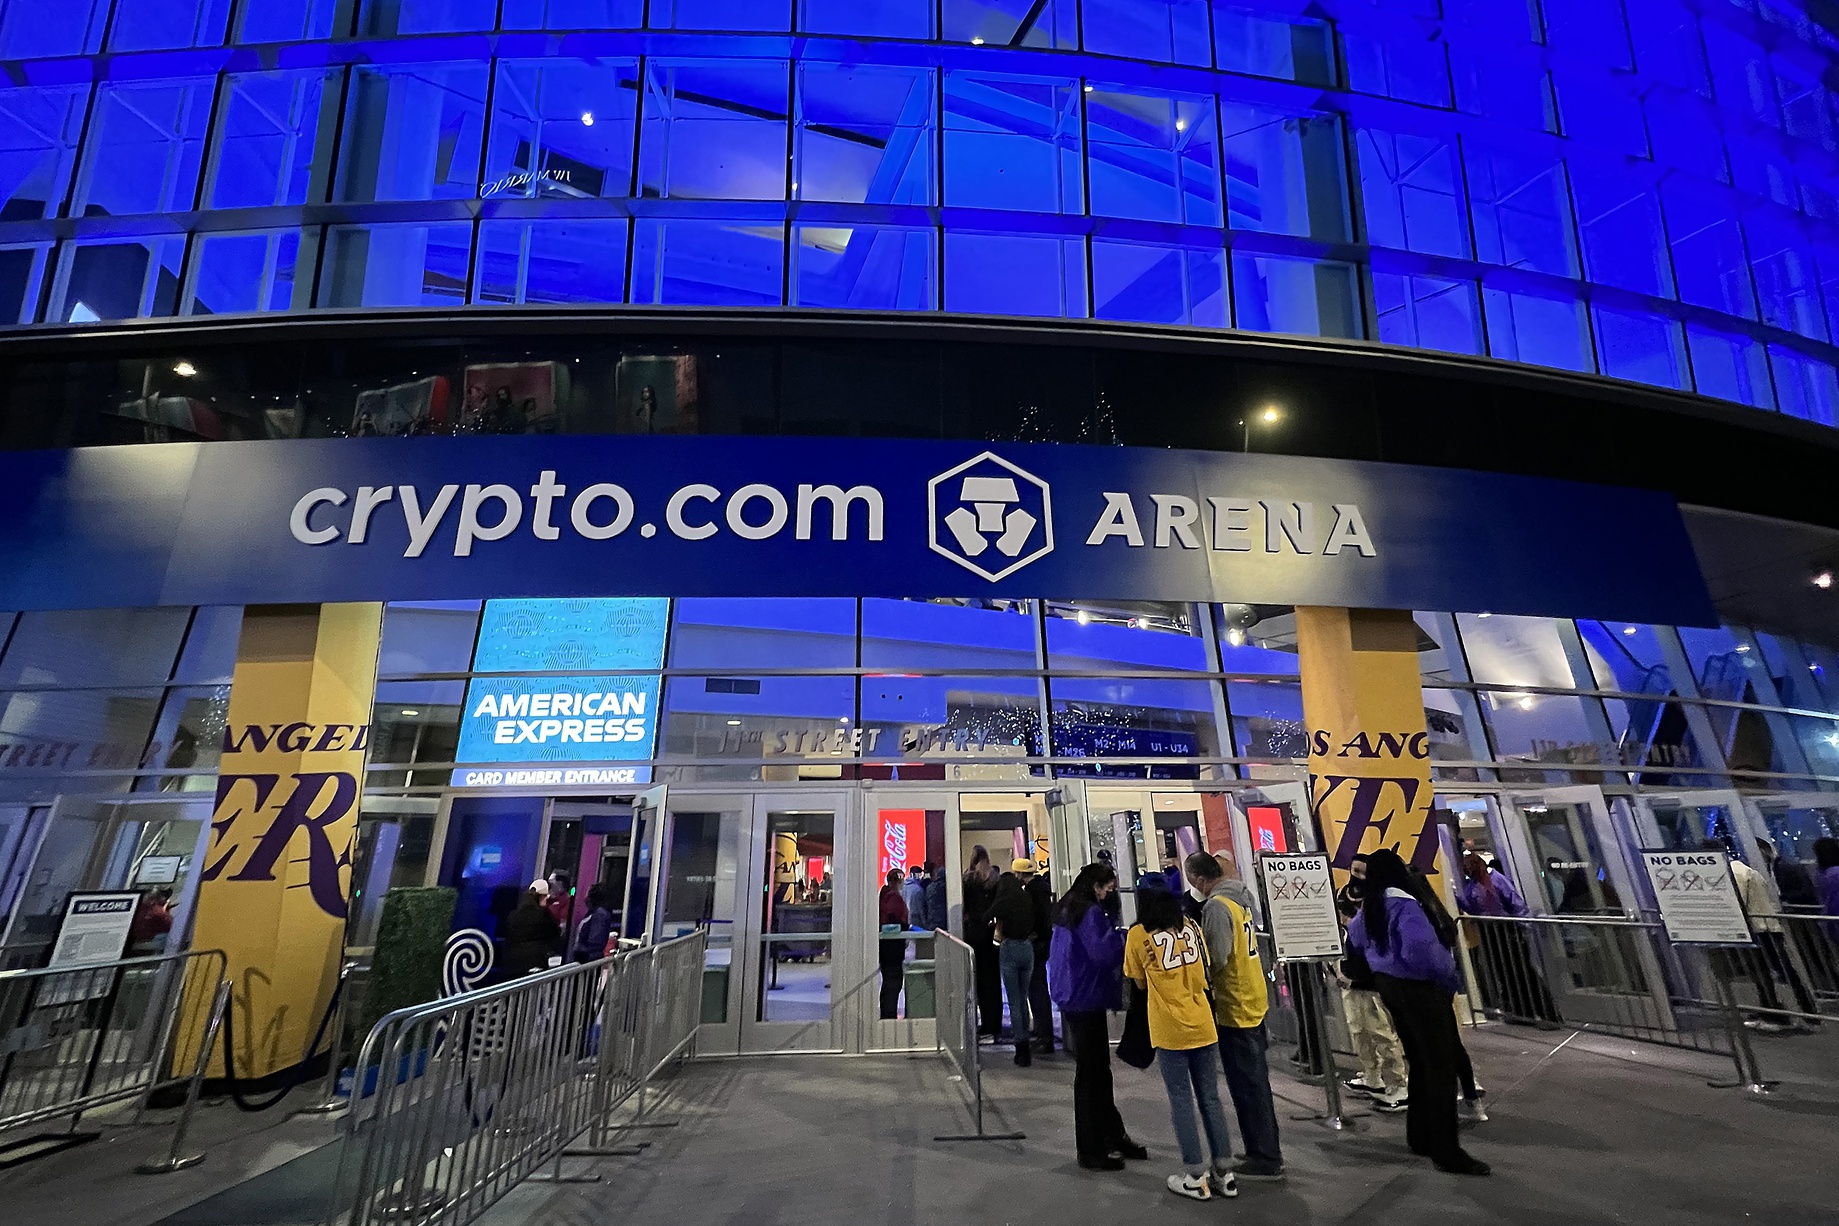 LA Angels and Washington Wizards miss out on sponsorships due to crypto  crash, says report - SportsPro